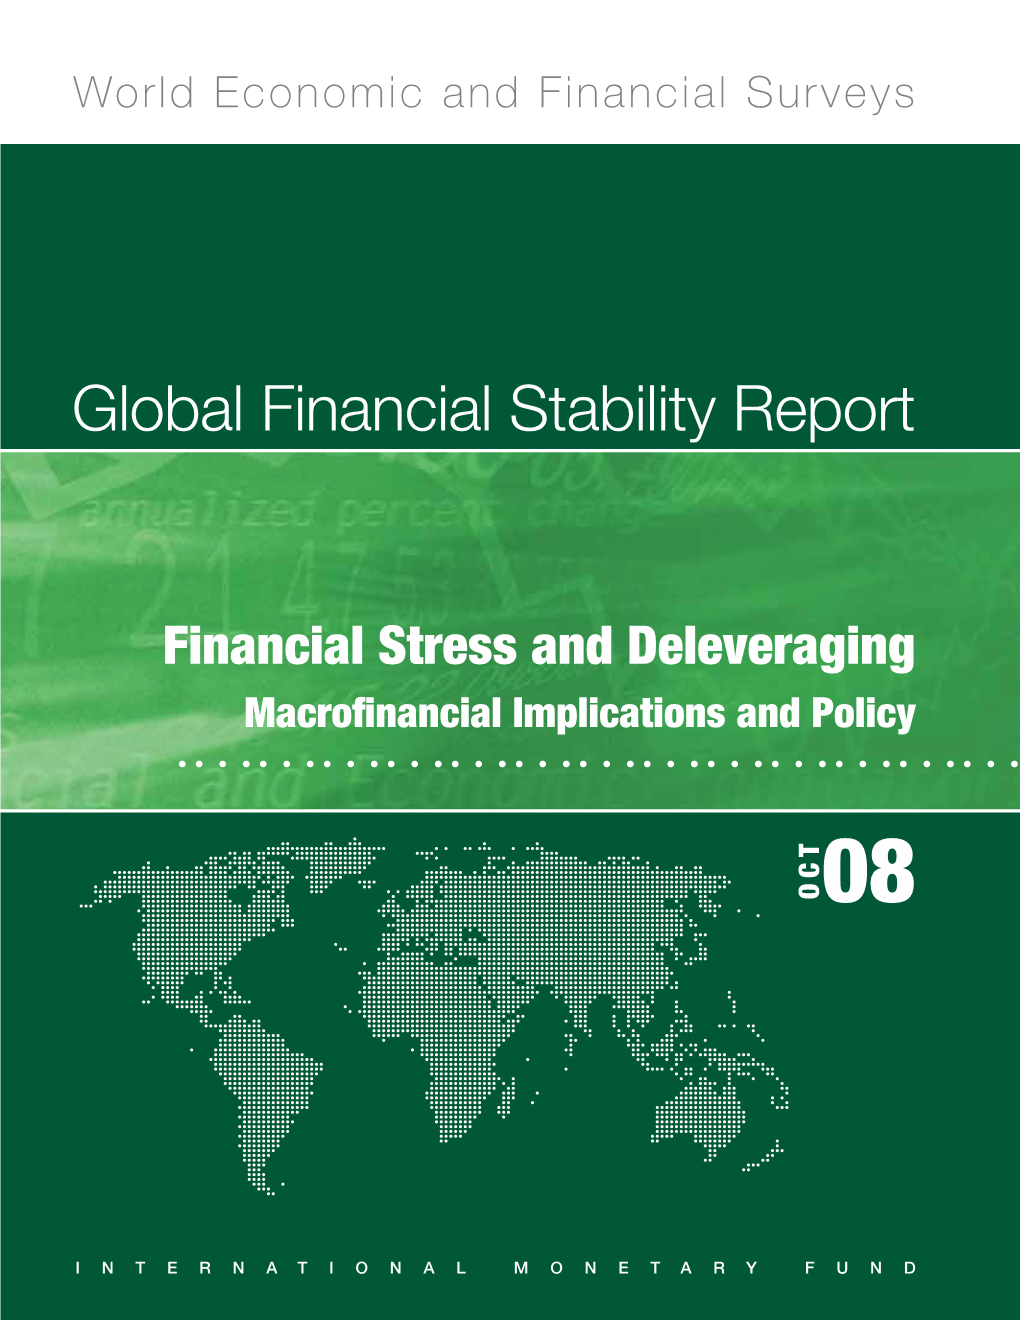 Global Financial Stability Report -- October 2008